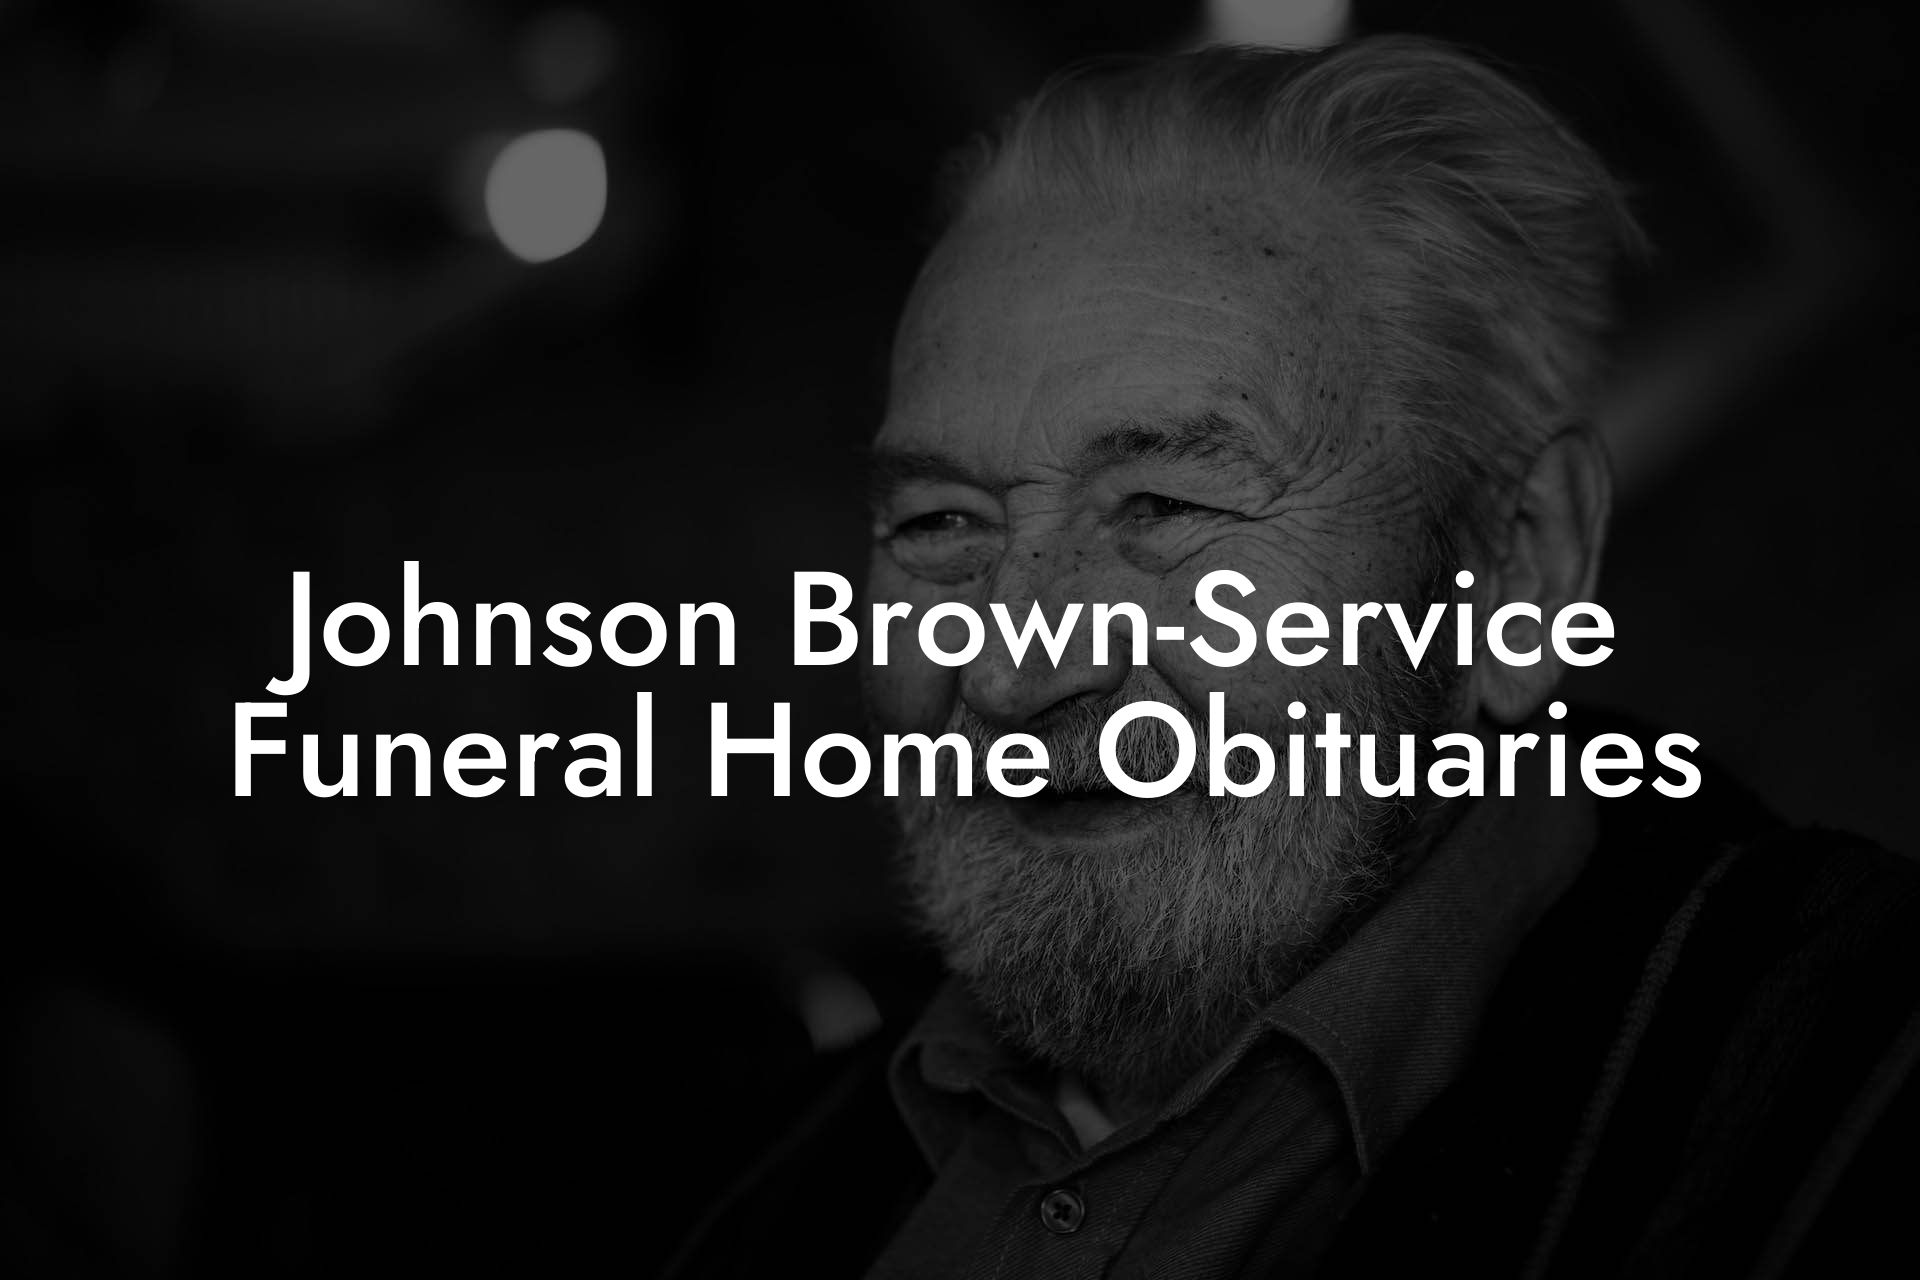 Johnson Brown-Service Funeral Home Obituaries